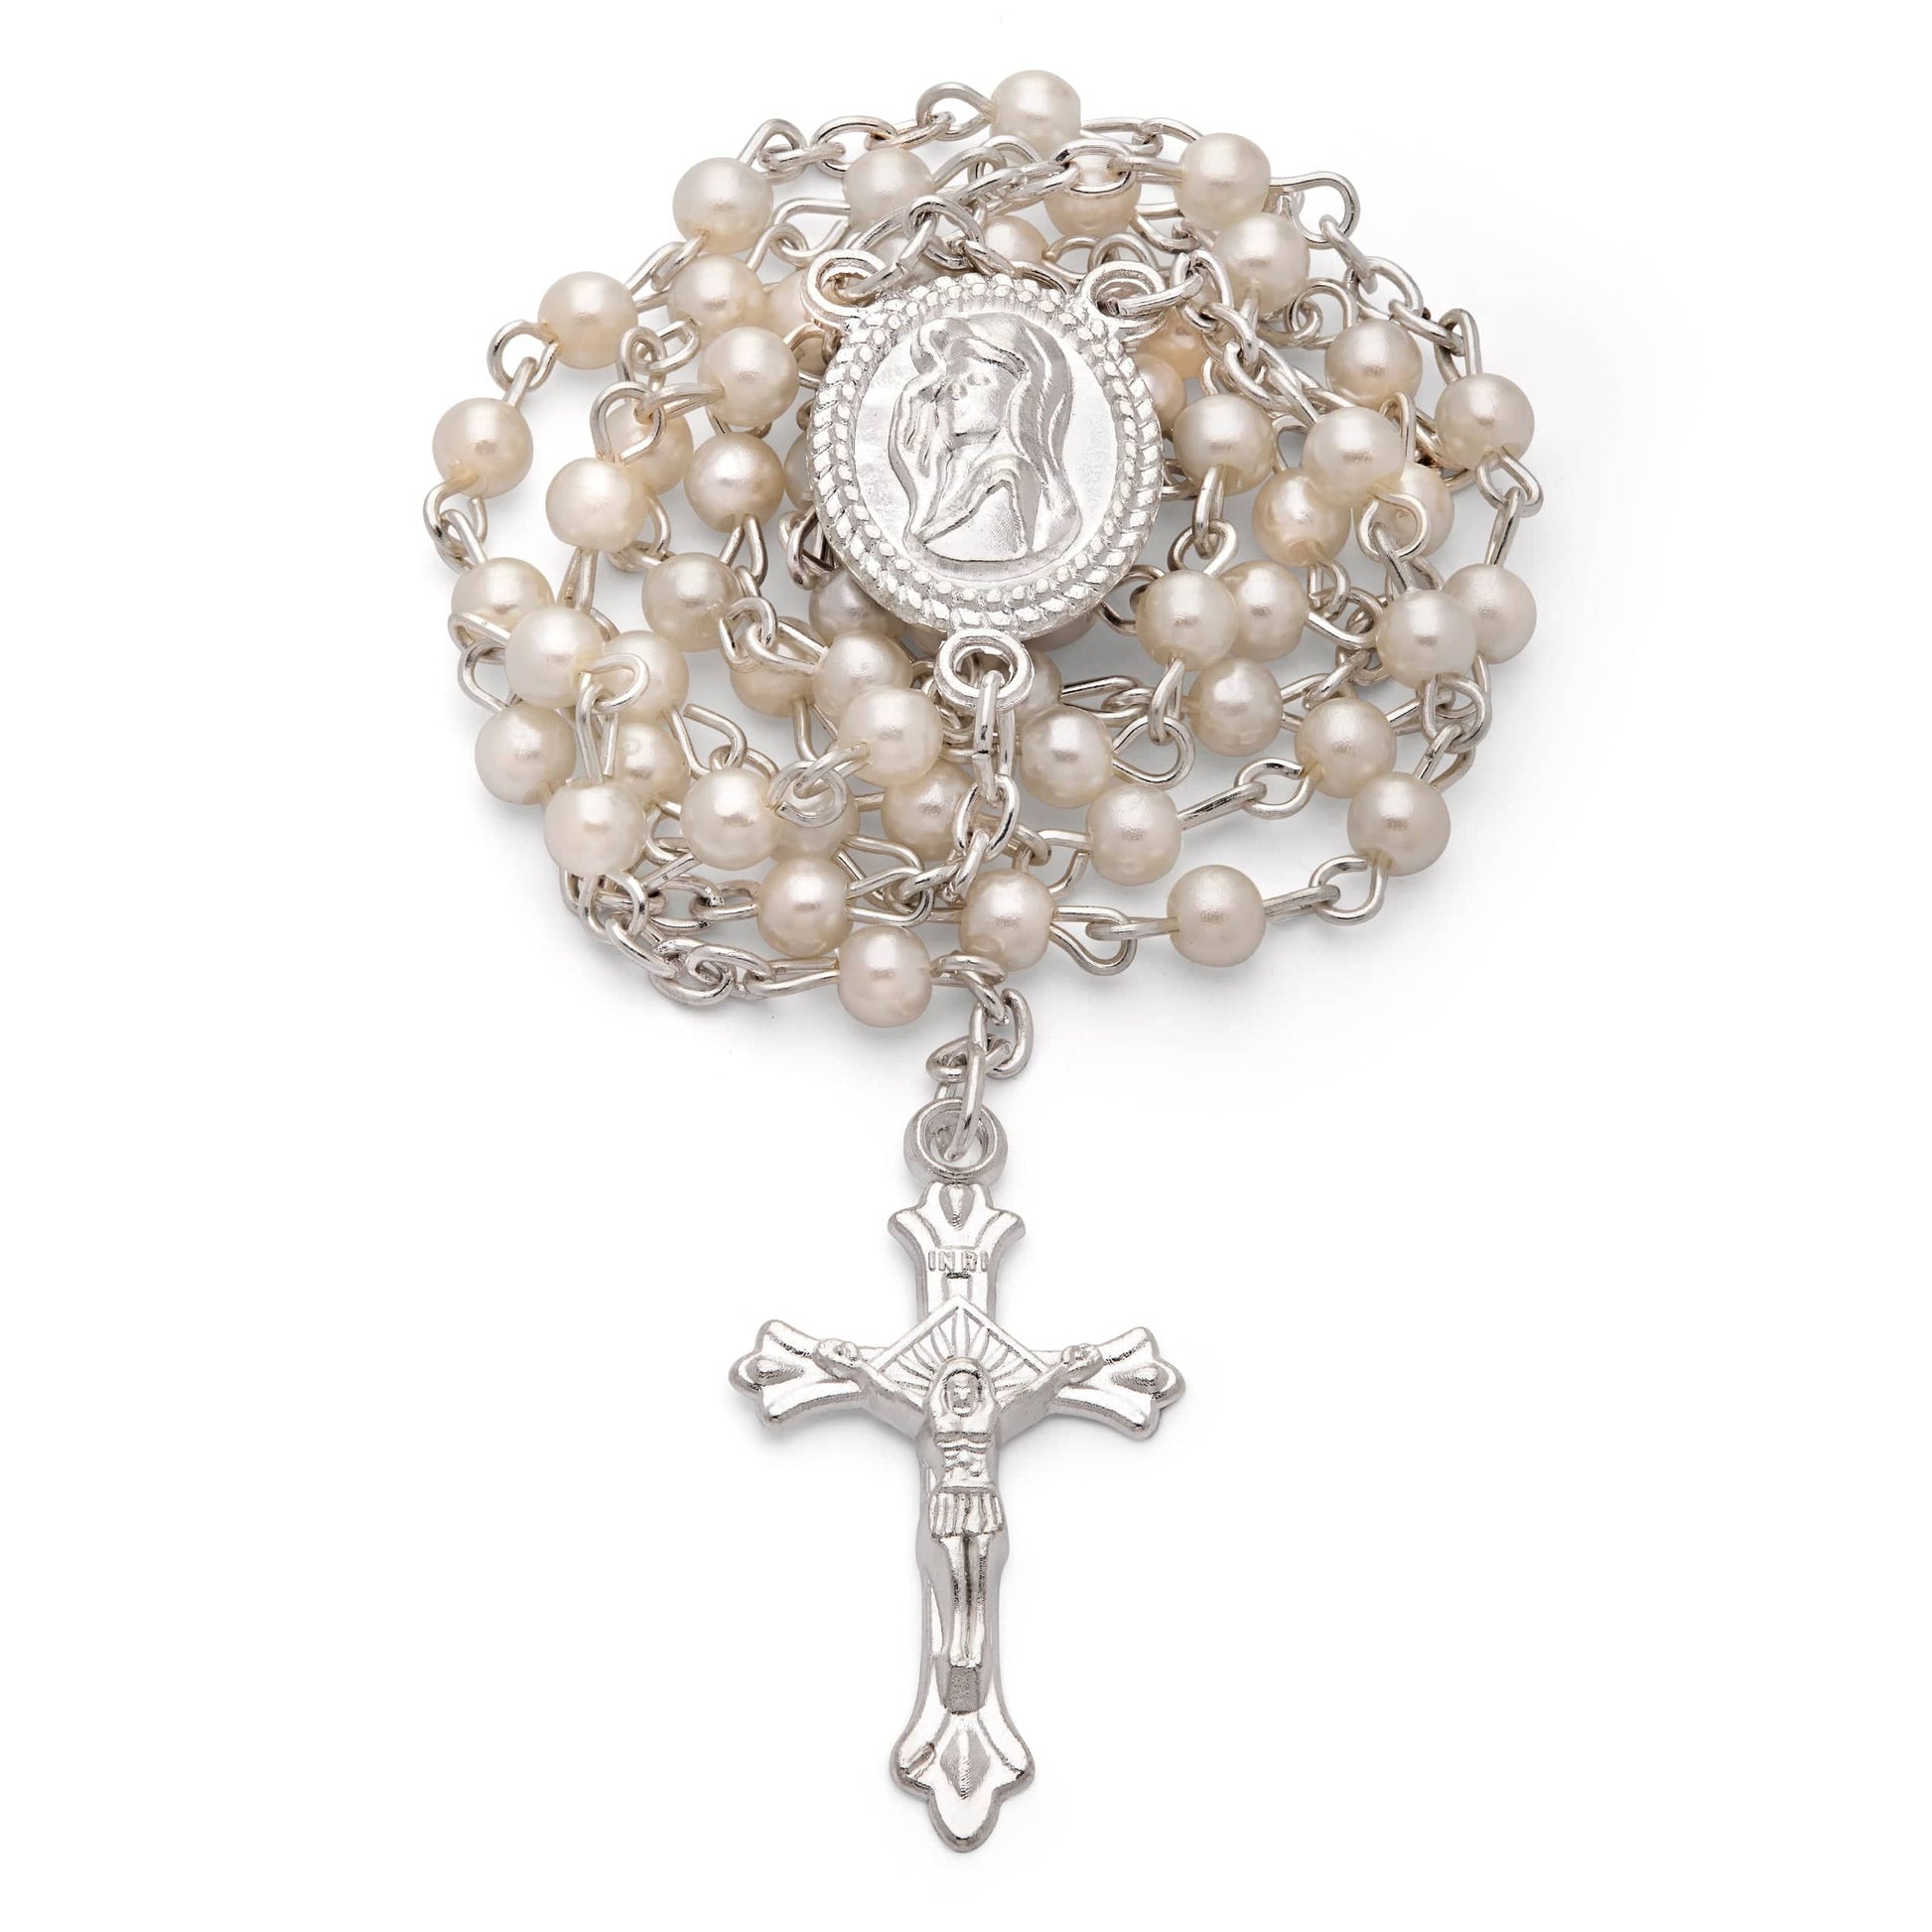 MONDO CATTOLICO Prayer Beads 40 cm (15.78 in) / 3 mm (0.11 in) Case and Rosary with Saint Benedict